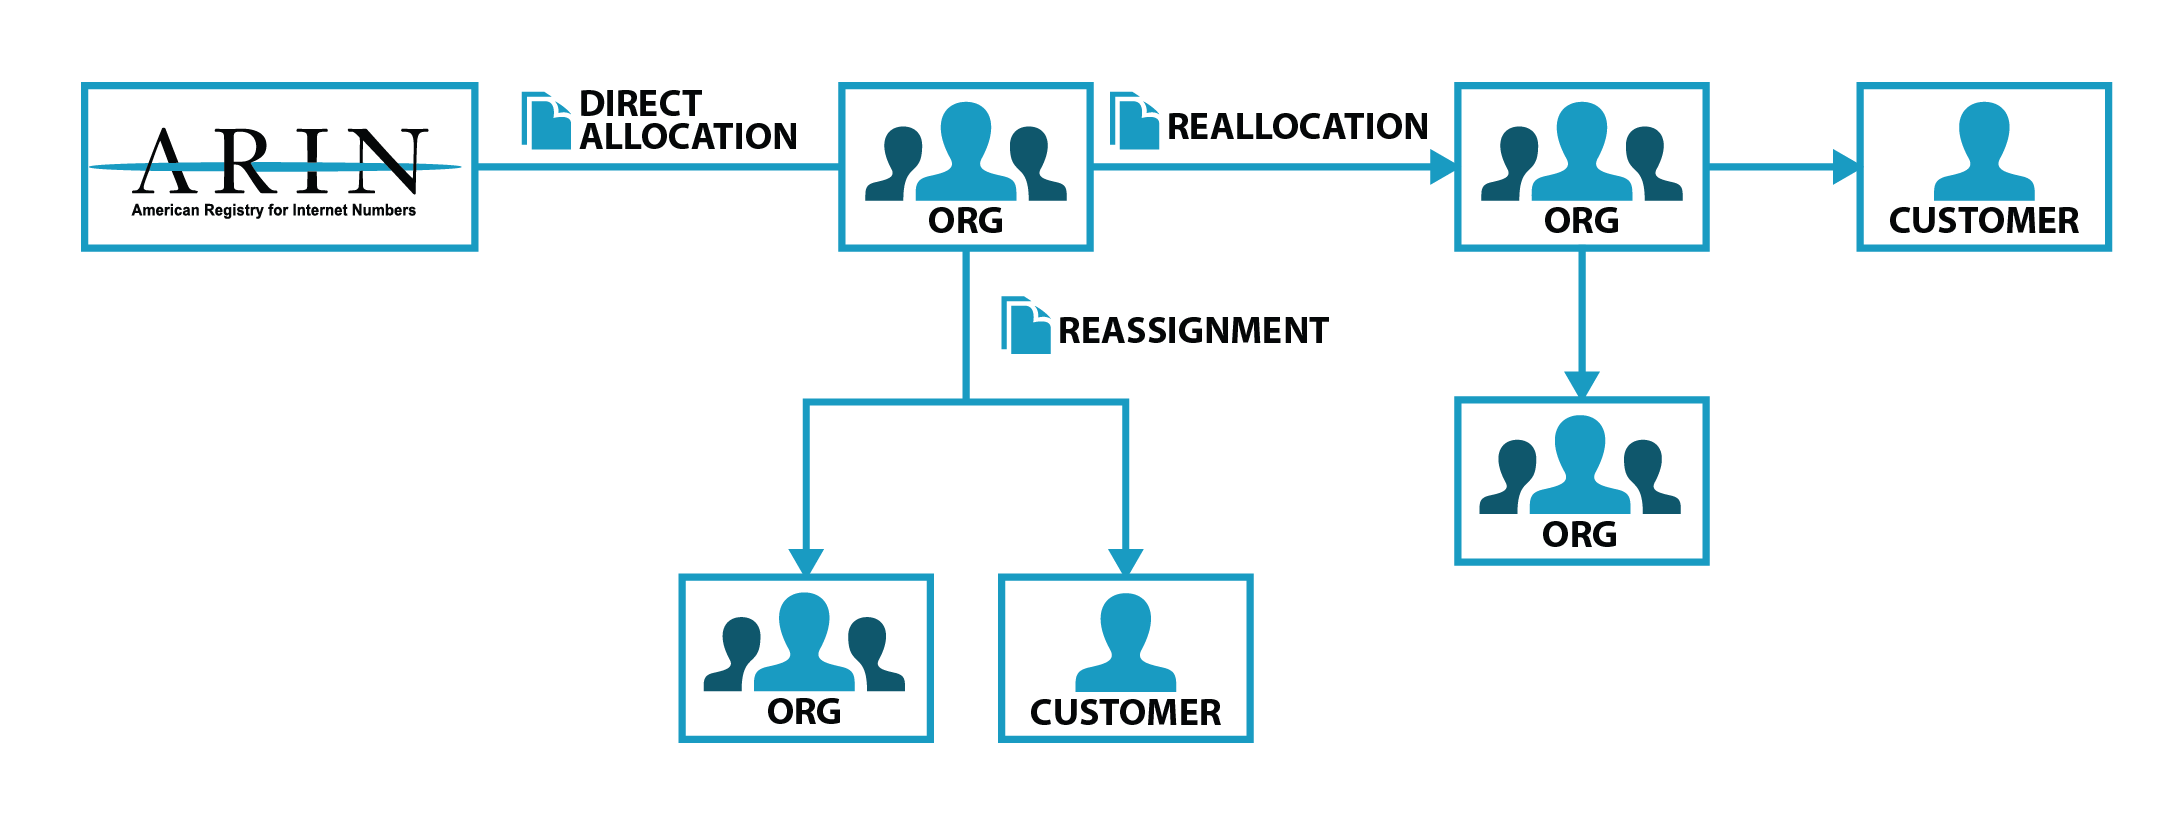 A flowchart showing how allocations and assignments relate to organizations and customers